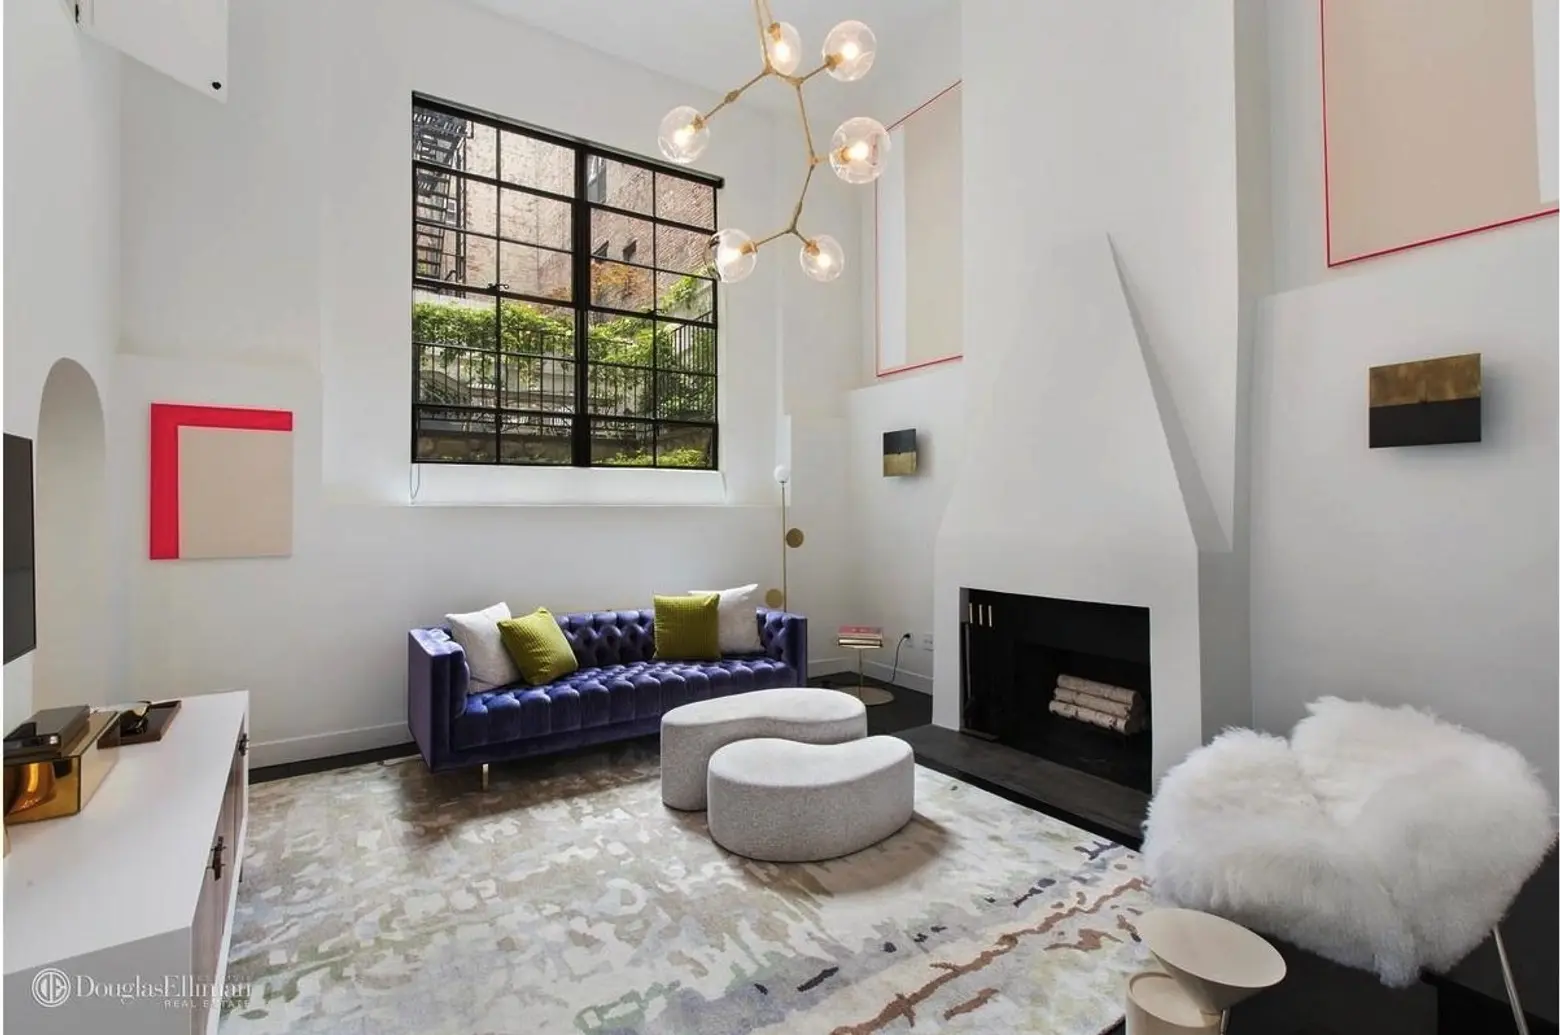 Strikingly modern duplex rents for $15,000/month in a historic West Village co-op